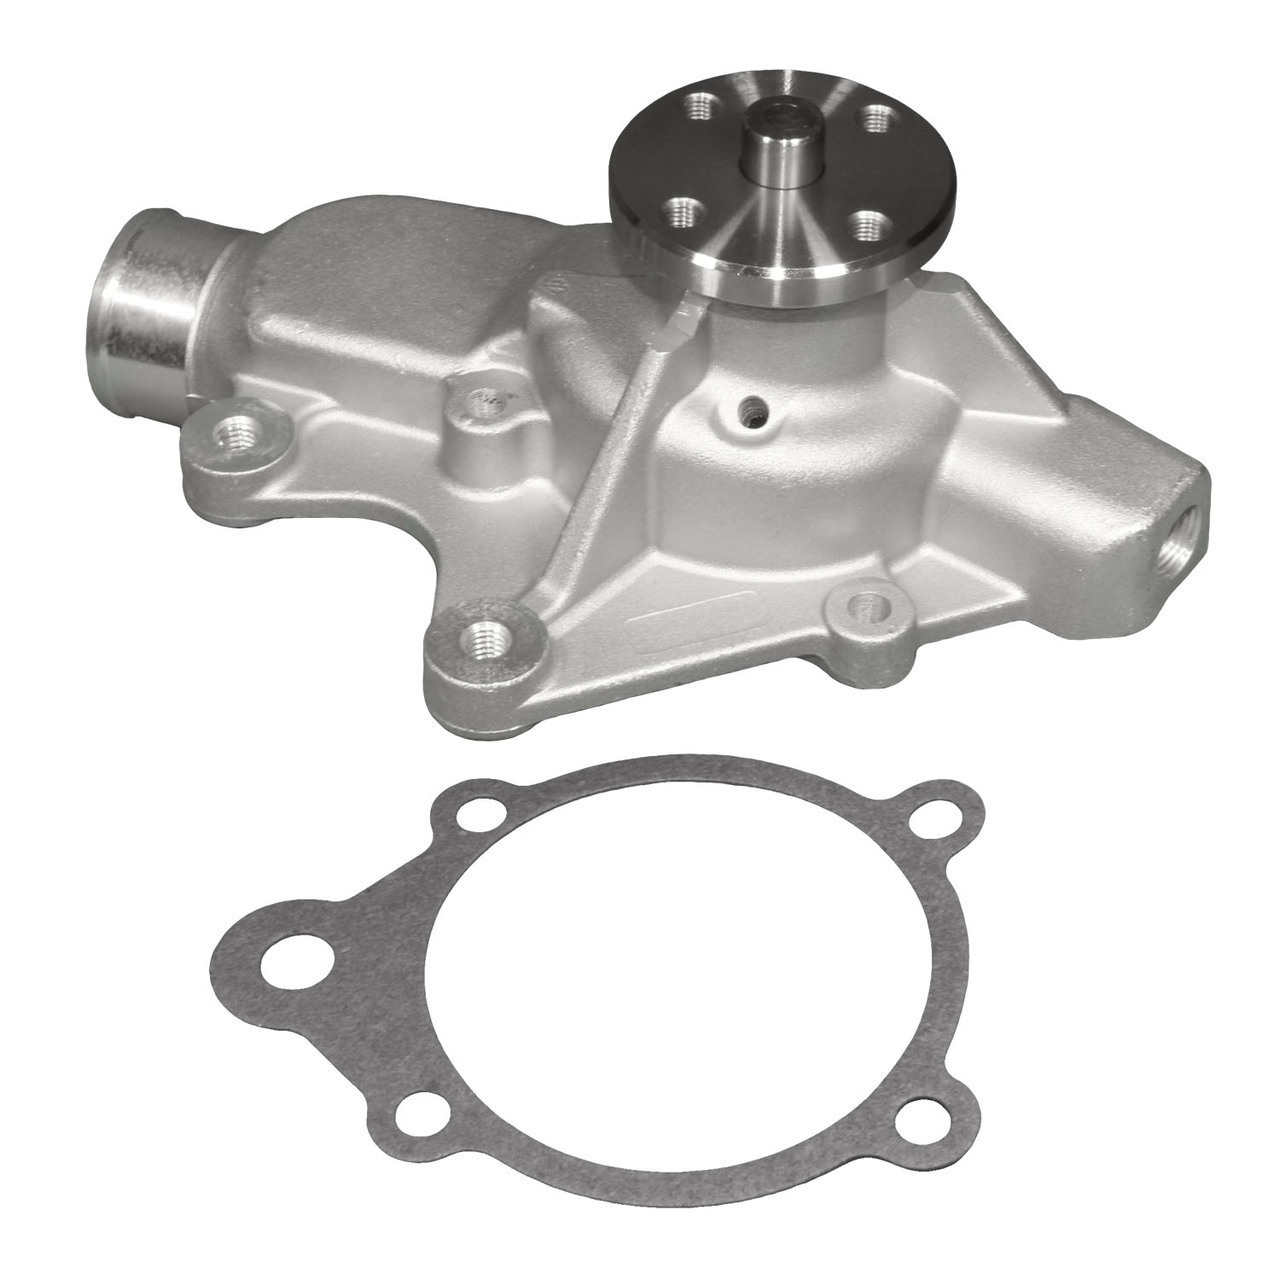 1994 Jeep Wrangler Engine Water Pump - ACDelco 252-279